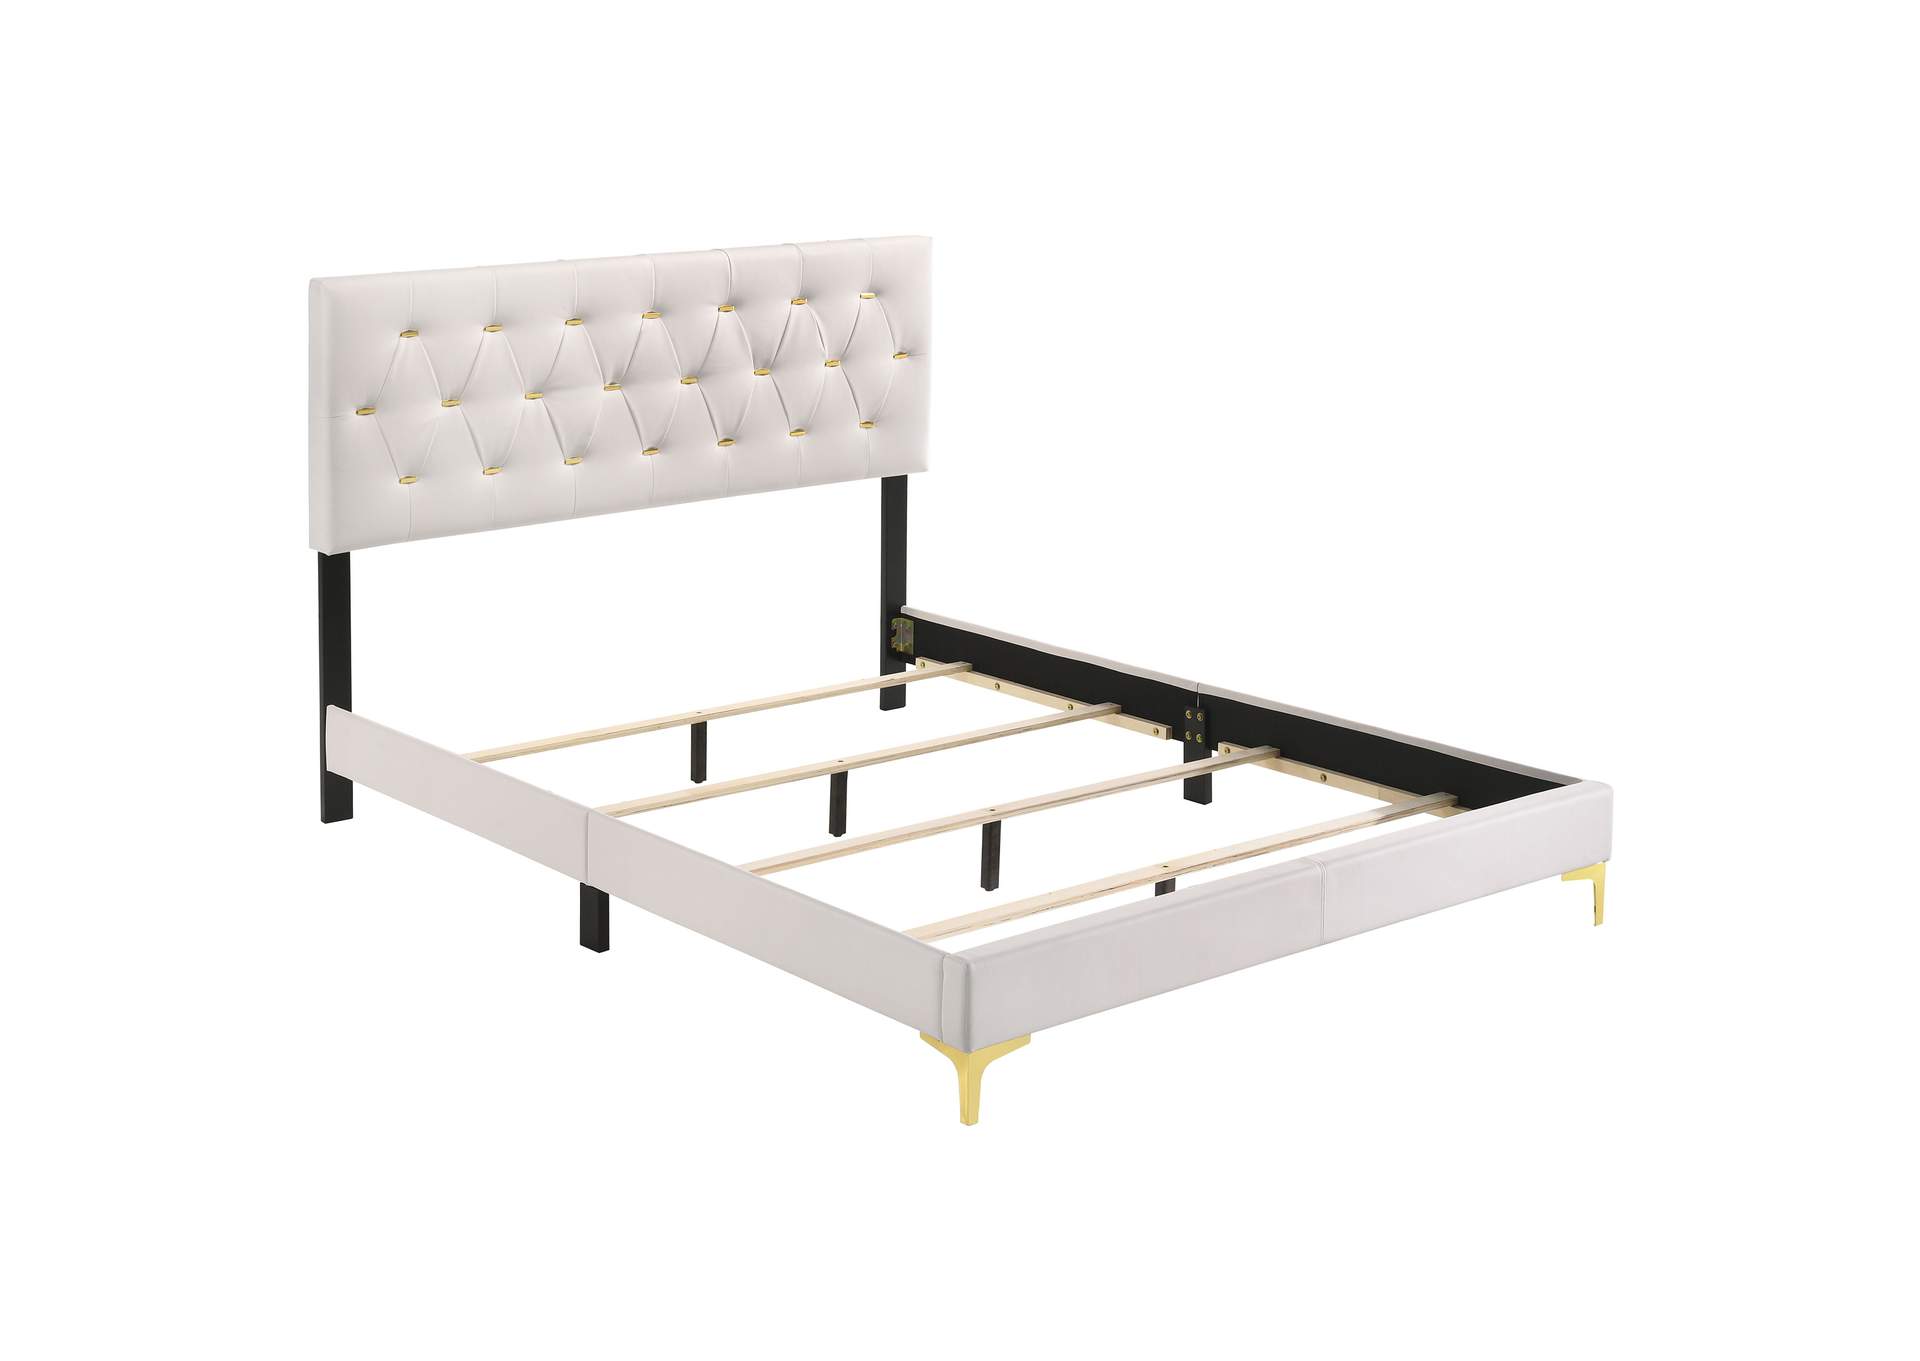 Kendall Tufted Upholstered Panel Eastern King Bed White,Coaster Furniture